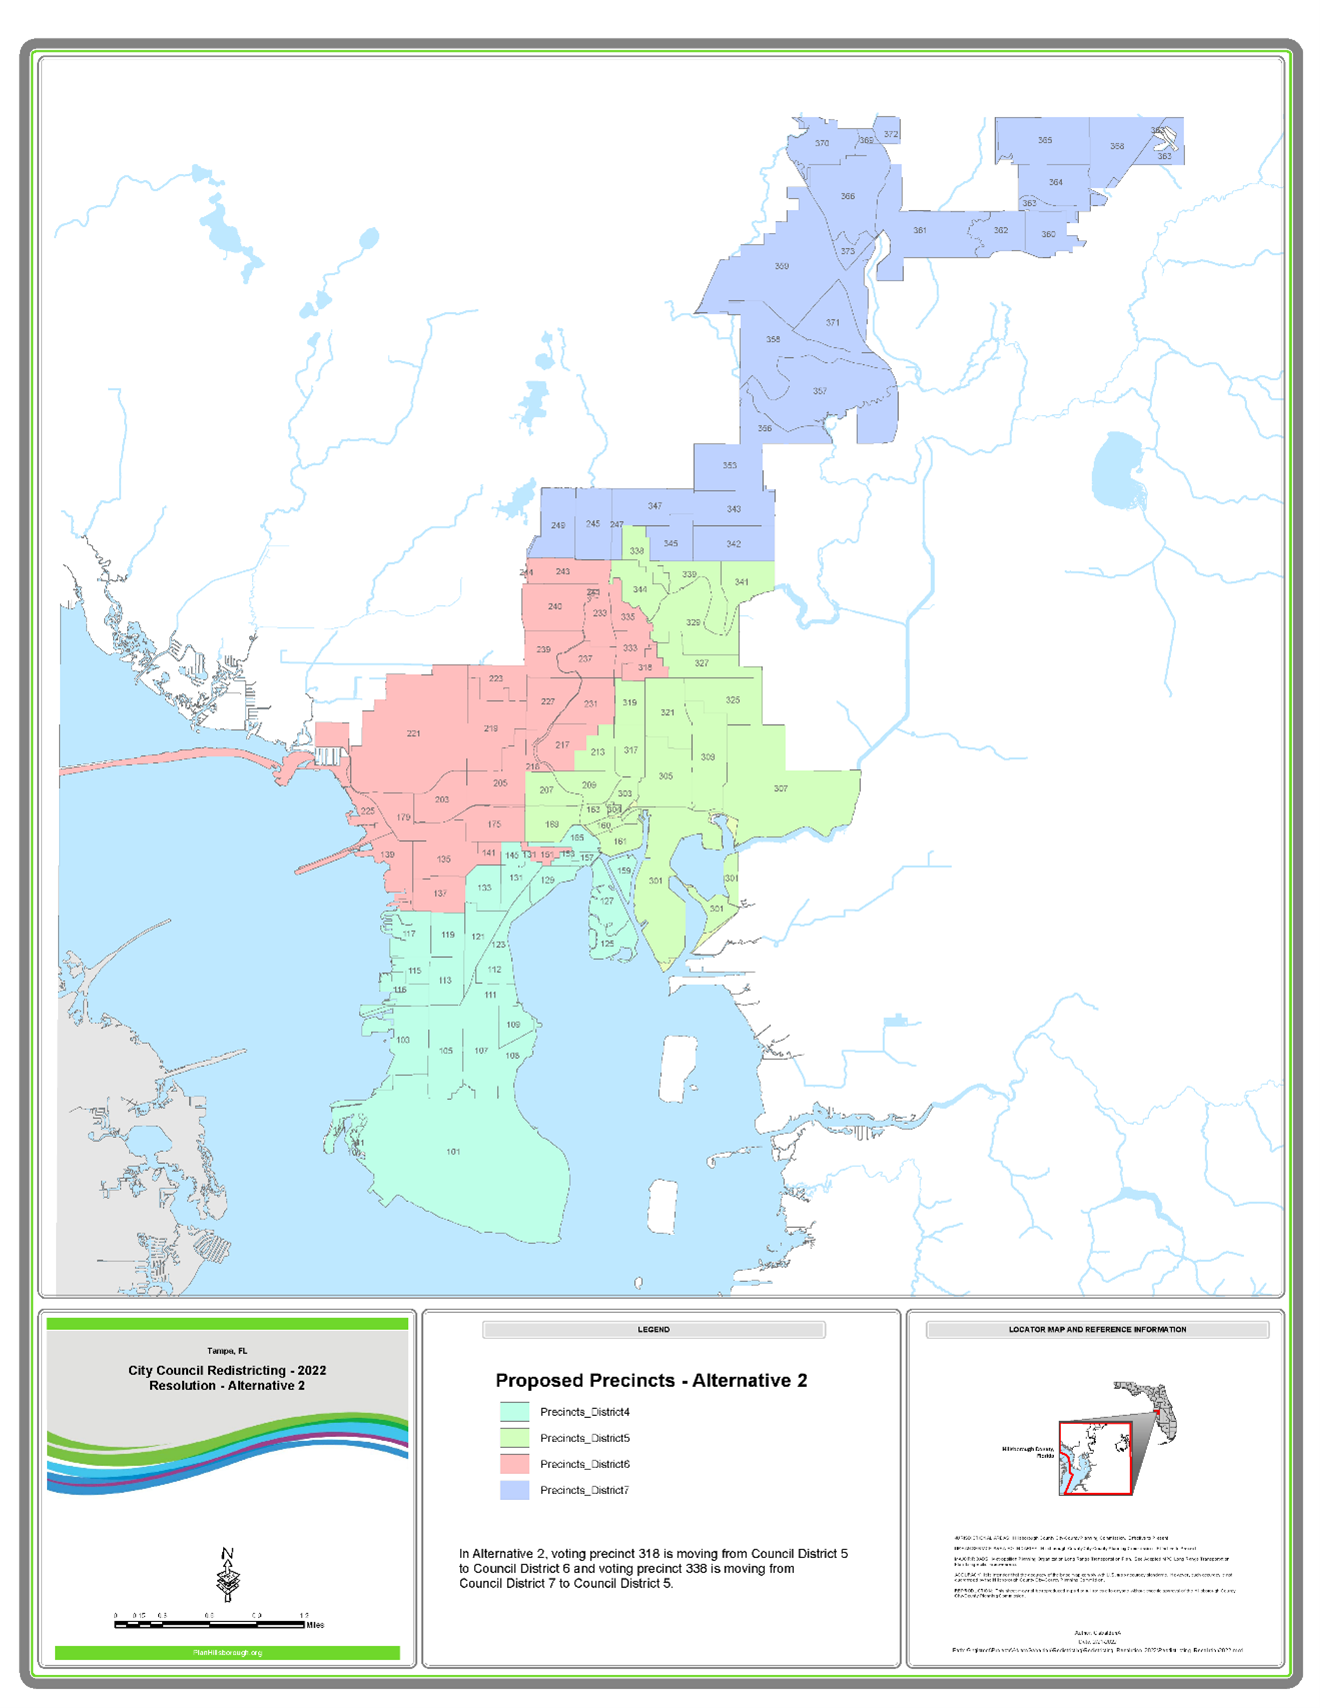 Figure 1 is a map of voting precincts colored by new single member districts for the City Tampa. This single member districts will be in effect for the March 2023 municipal elections. The colors for each Districts are as follows: District 4 (South Tampa) is in cyan District 5 (East Tampa) is in green District 6 (Westshore) is in rose District 7 (New Tampa ) is in blue